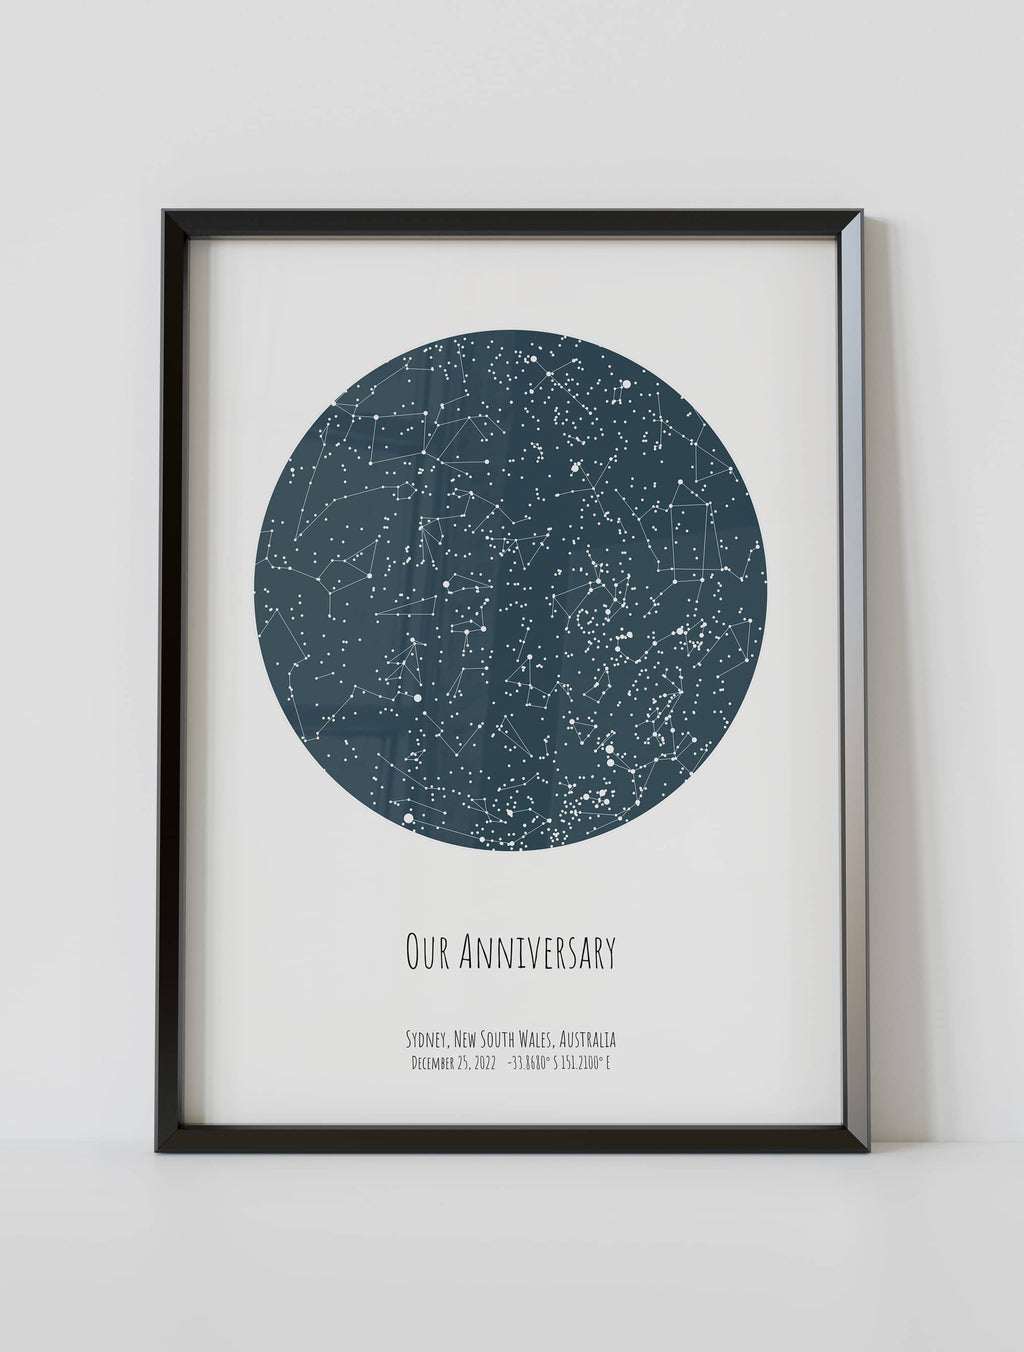 A framed star map poster featuring a specific date and location, customized with the quote "Our anniversary "